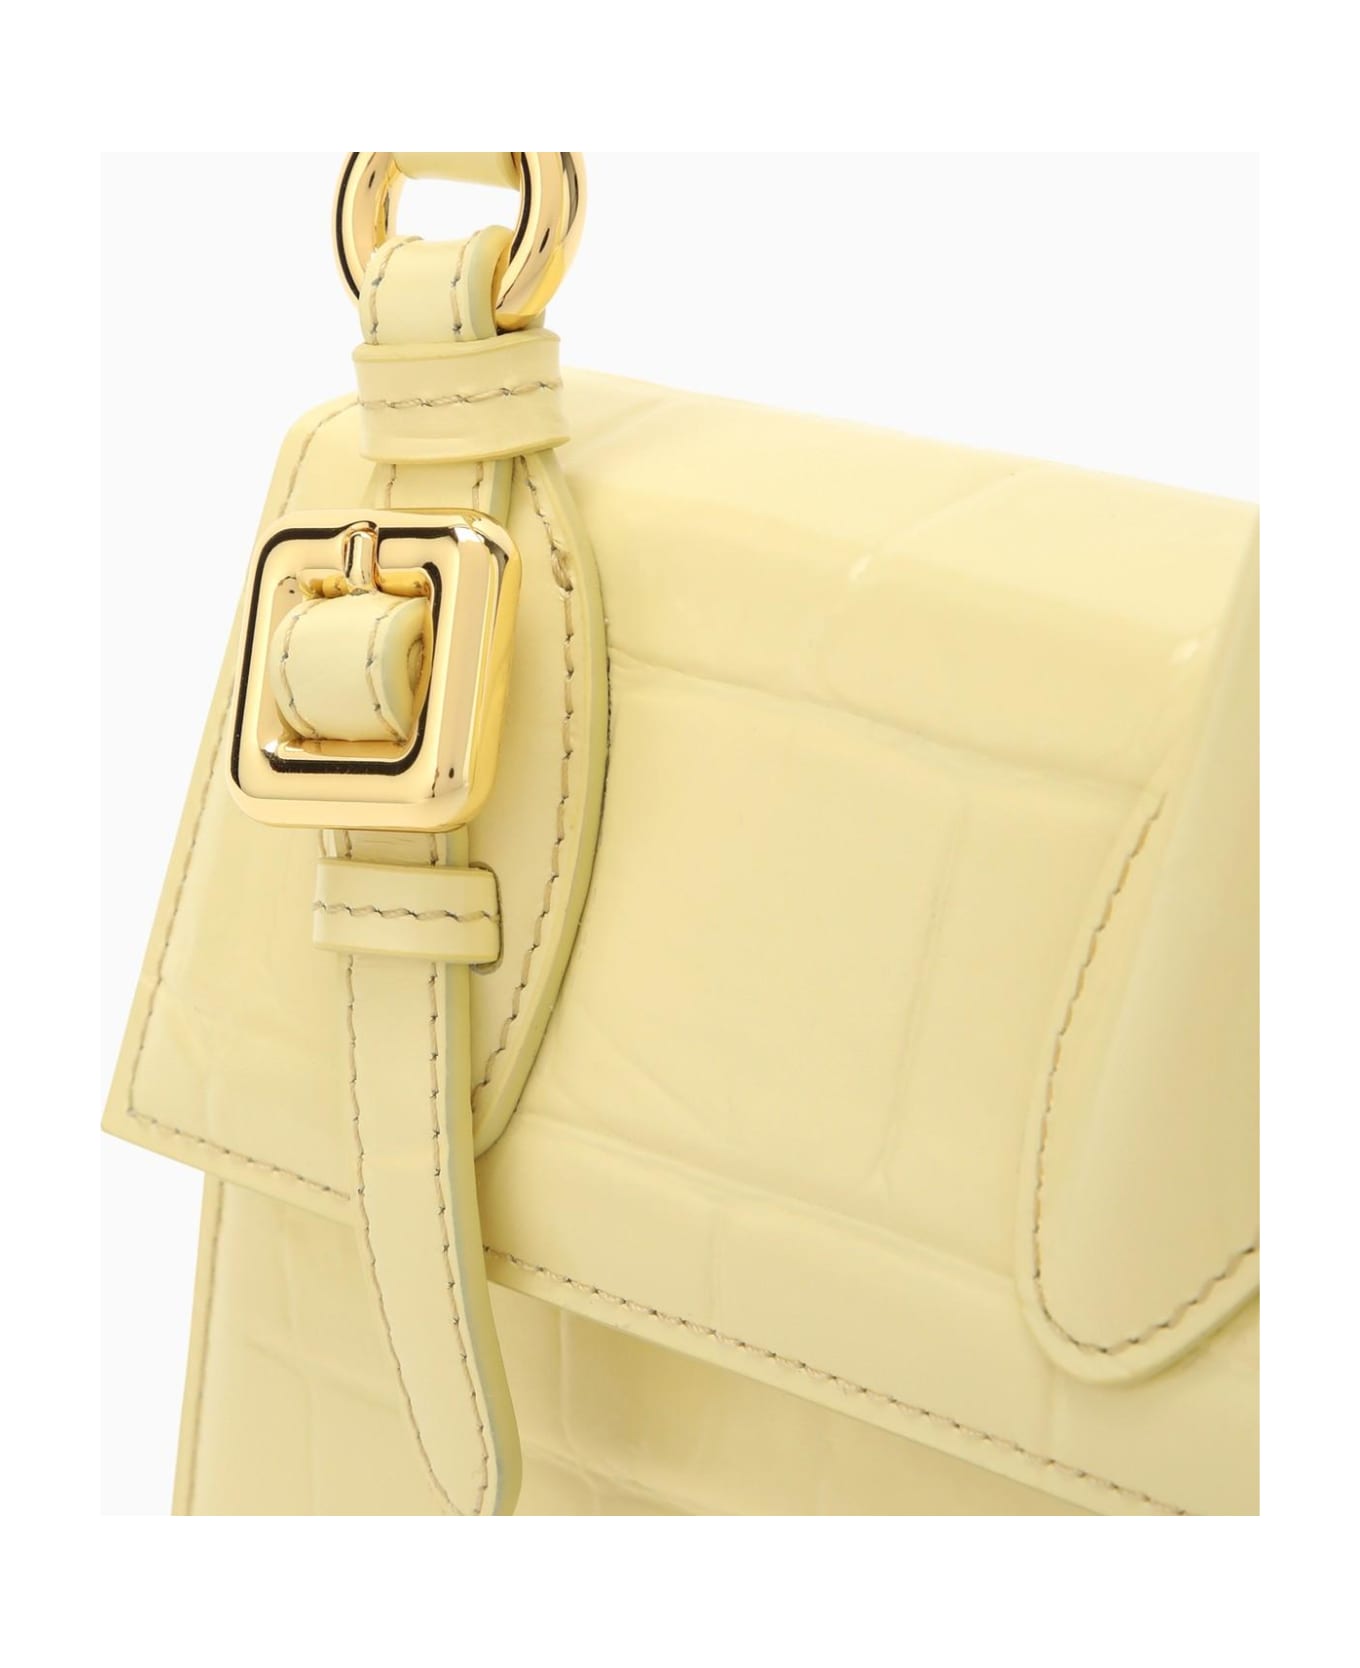 Jacquemus Le Chiquito Moyen Boucle Light Yellow Embossed Leather Bag - YELLOW トートバッグ